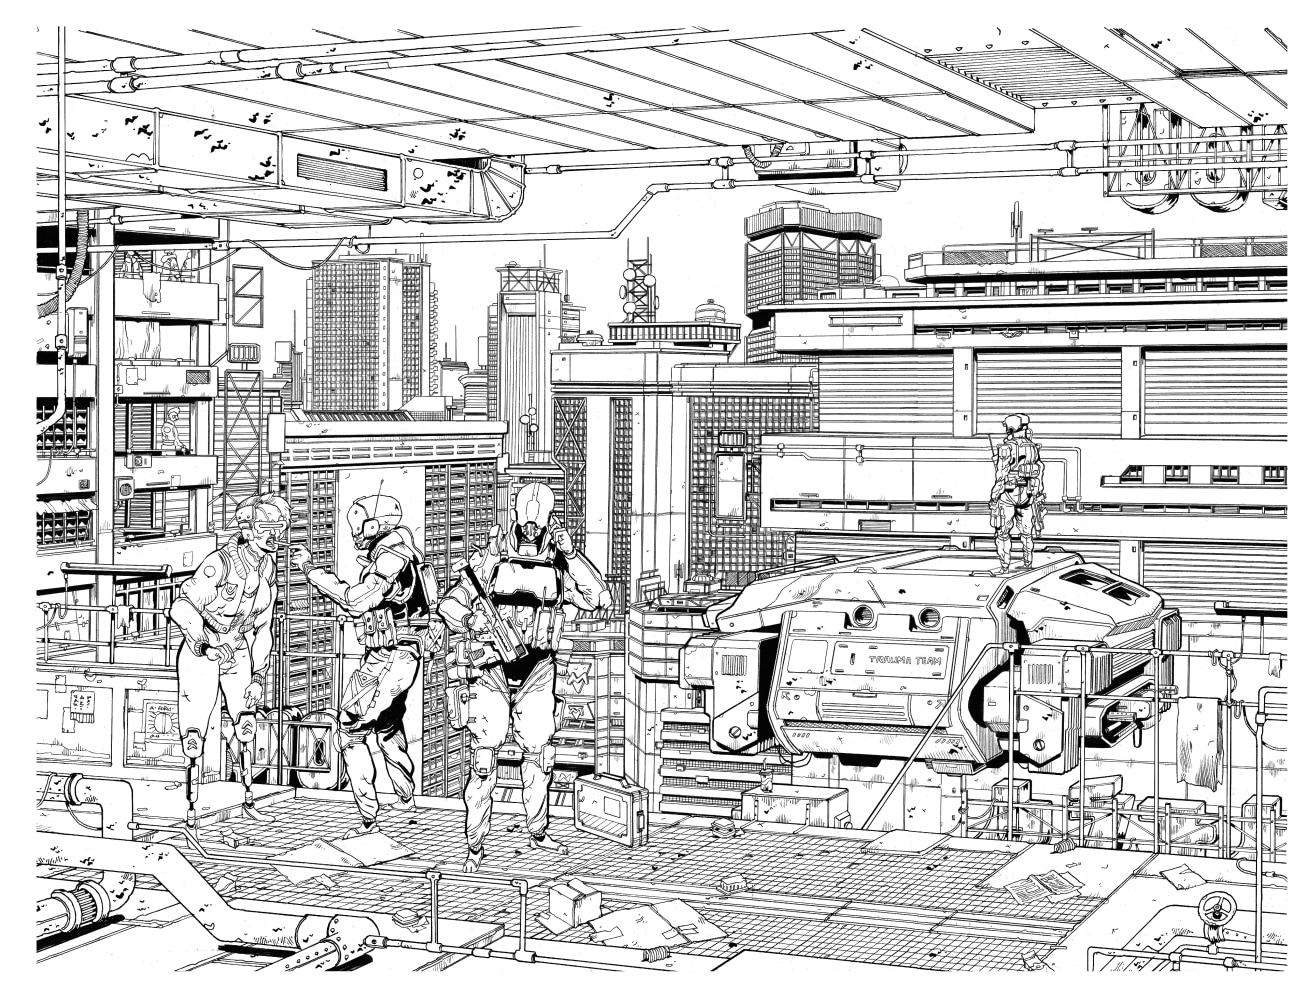 Cyberpunk 2077, 2021

Inactinic np and china ink on paper

Framed: 25 x 32 3/4 inches

$9,000 - Sold